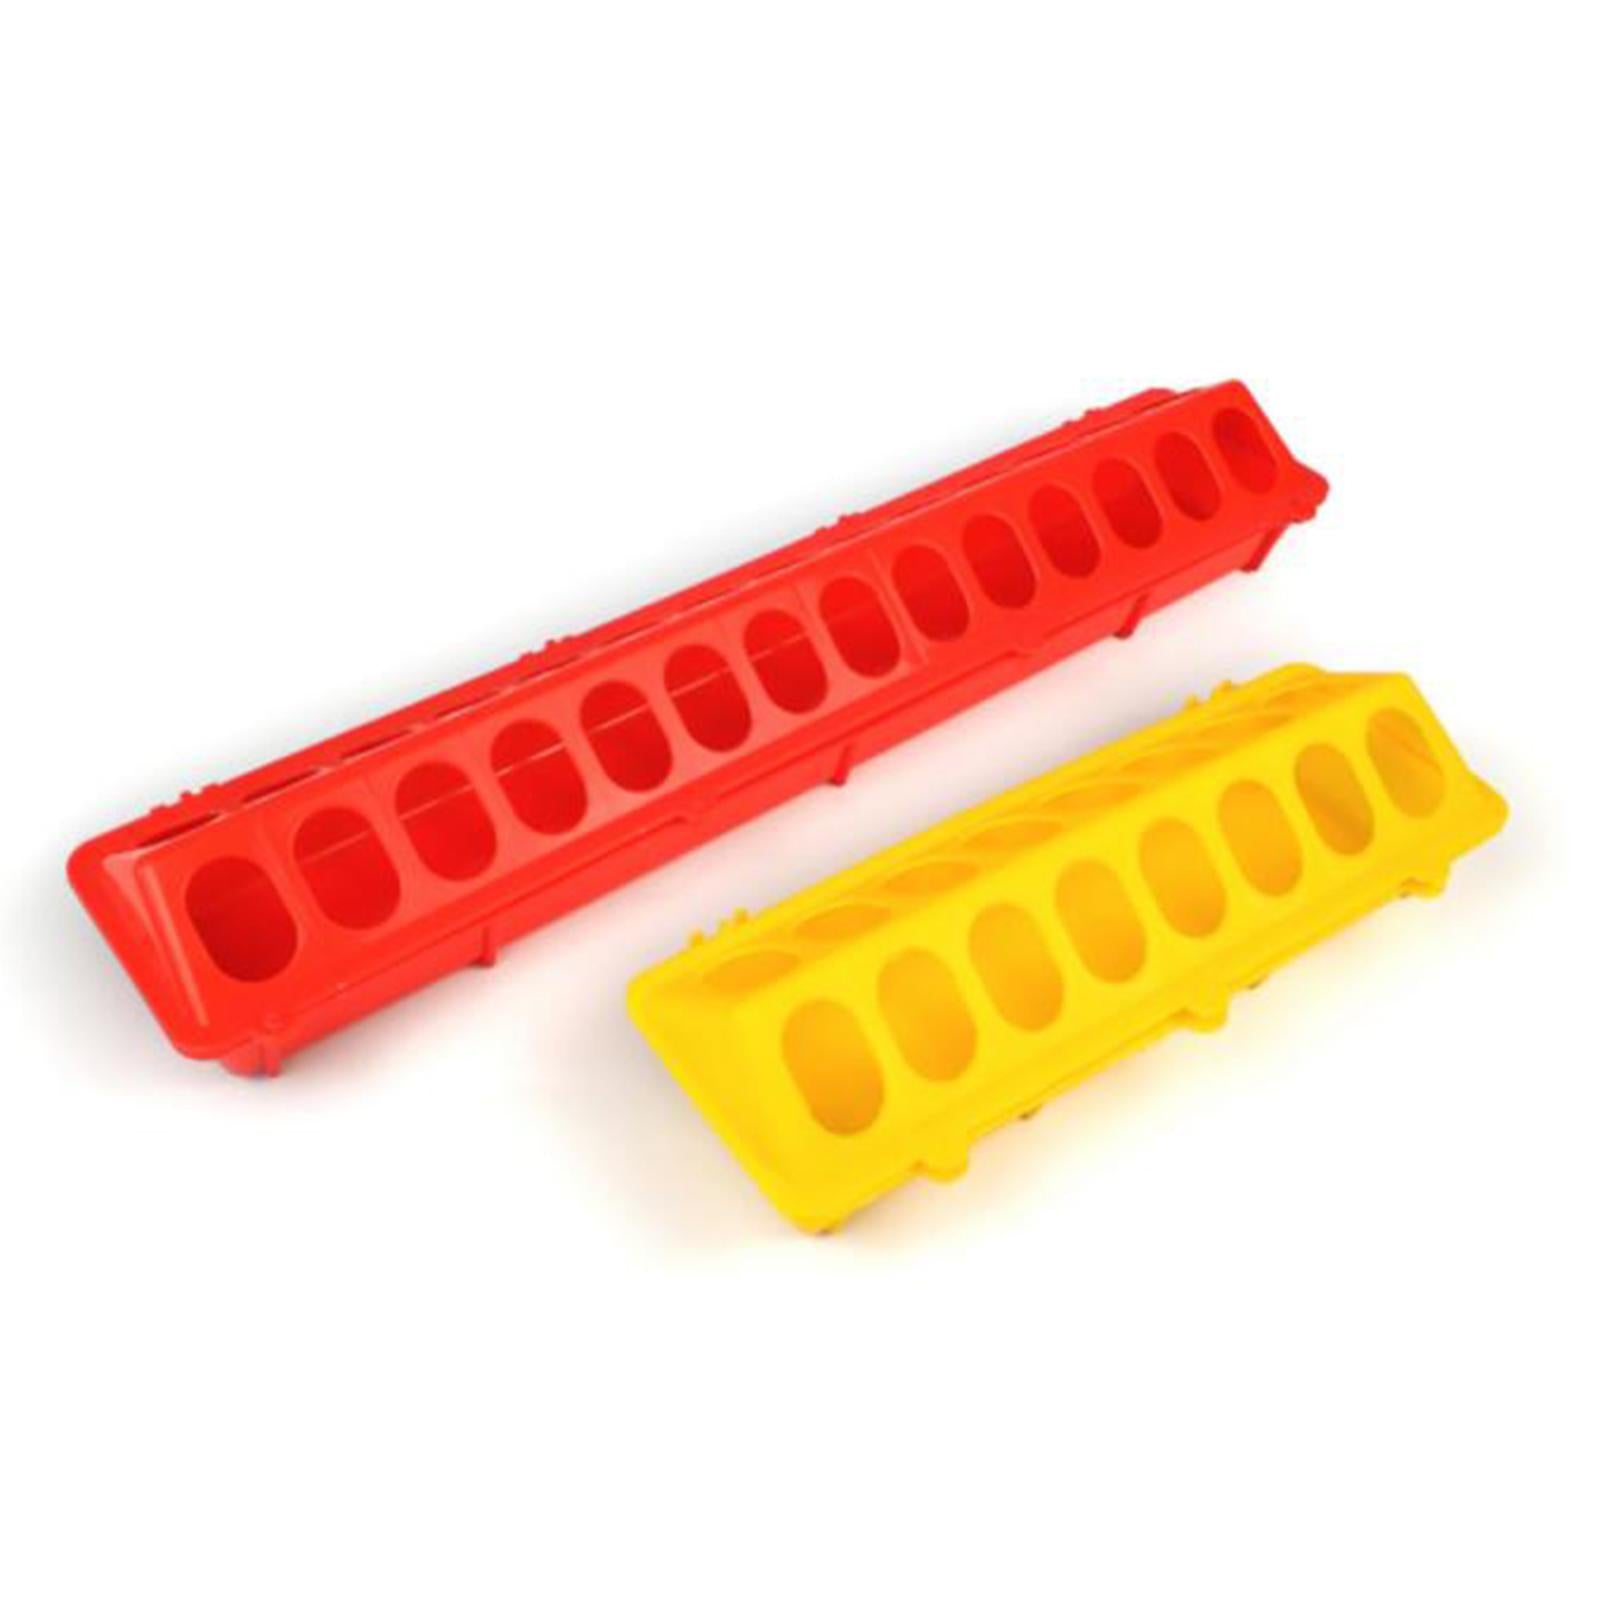 Poultry Feeder Chicken Feeding Trough Plastic Flip Top Container Red